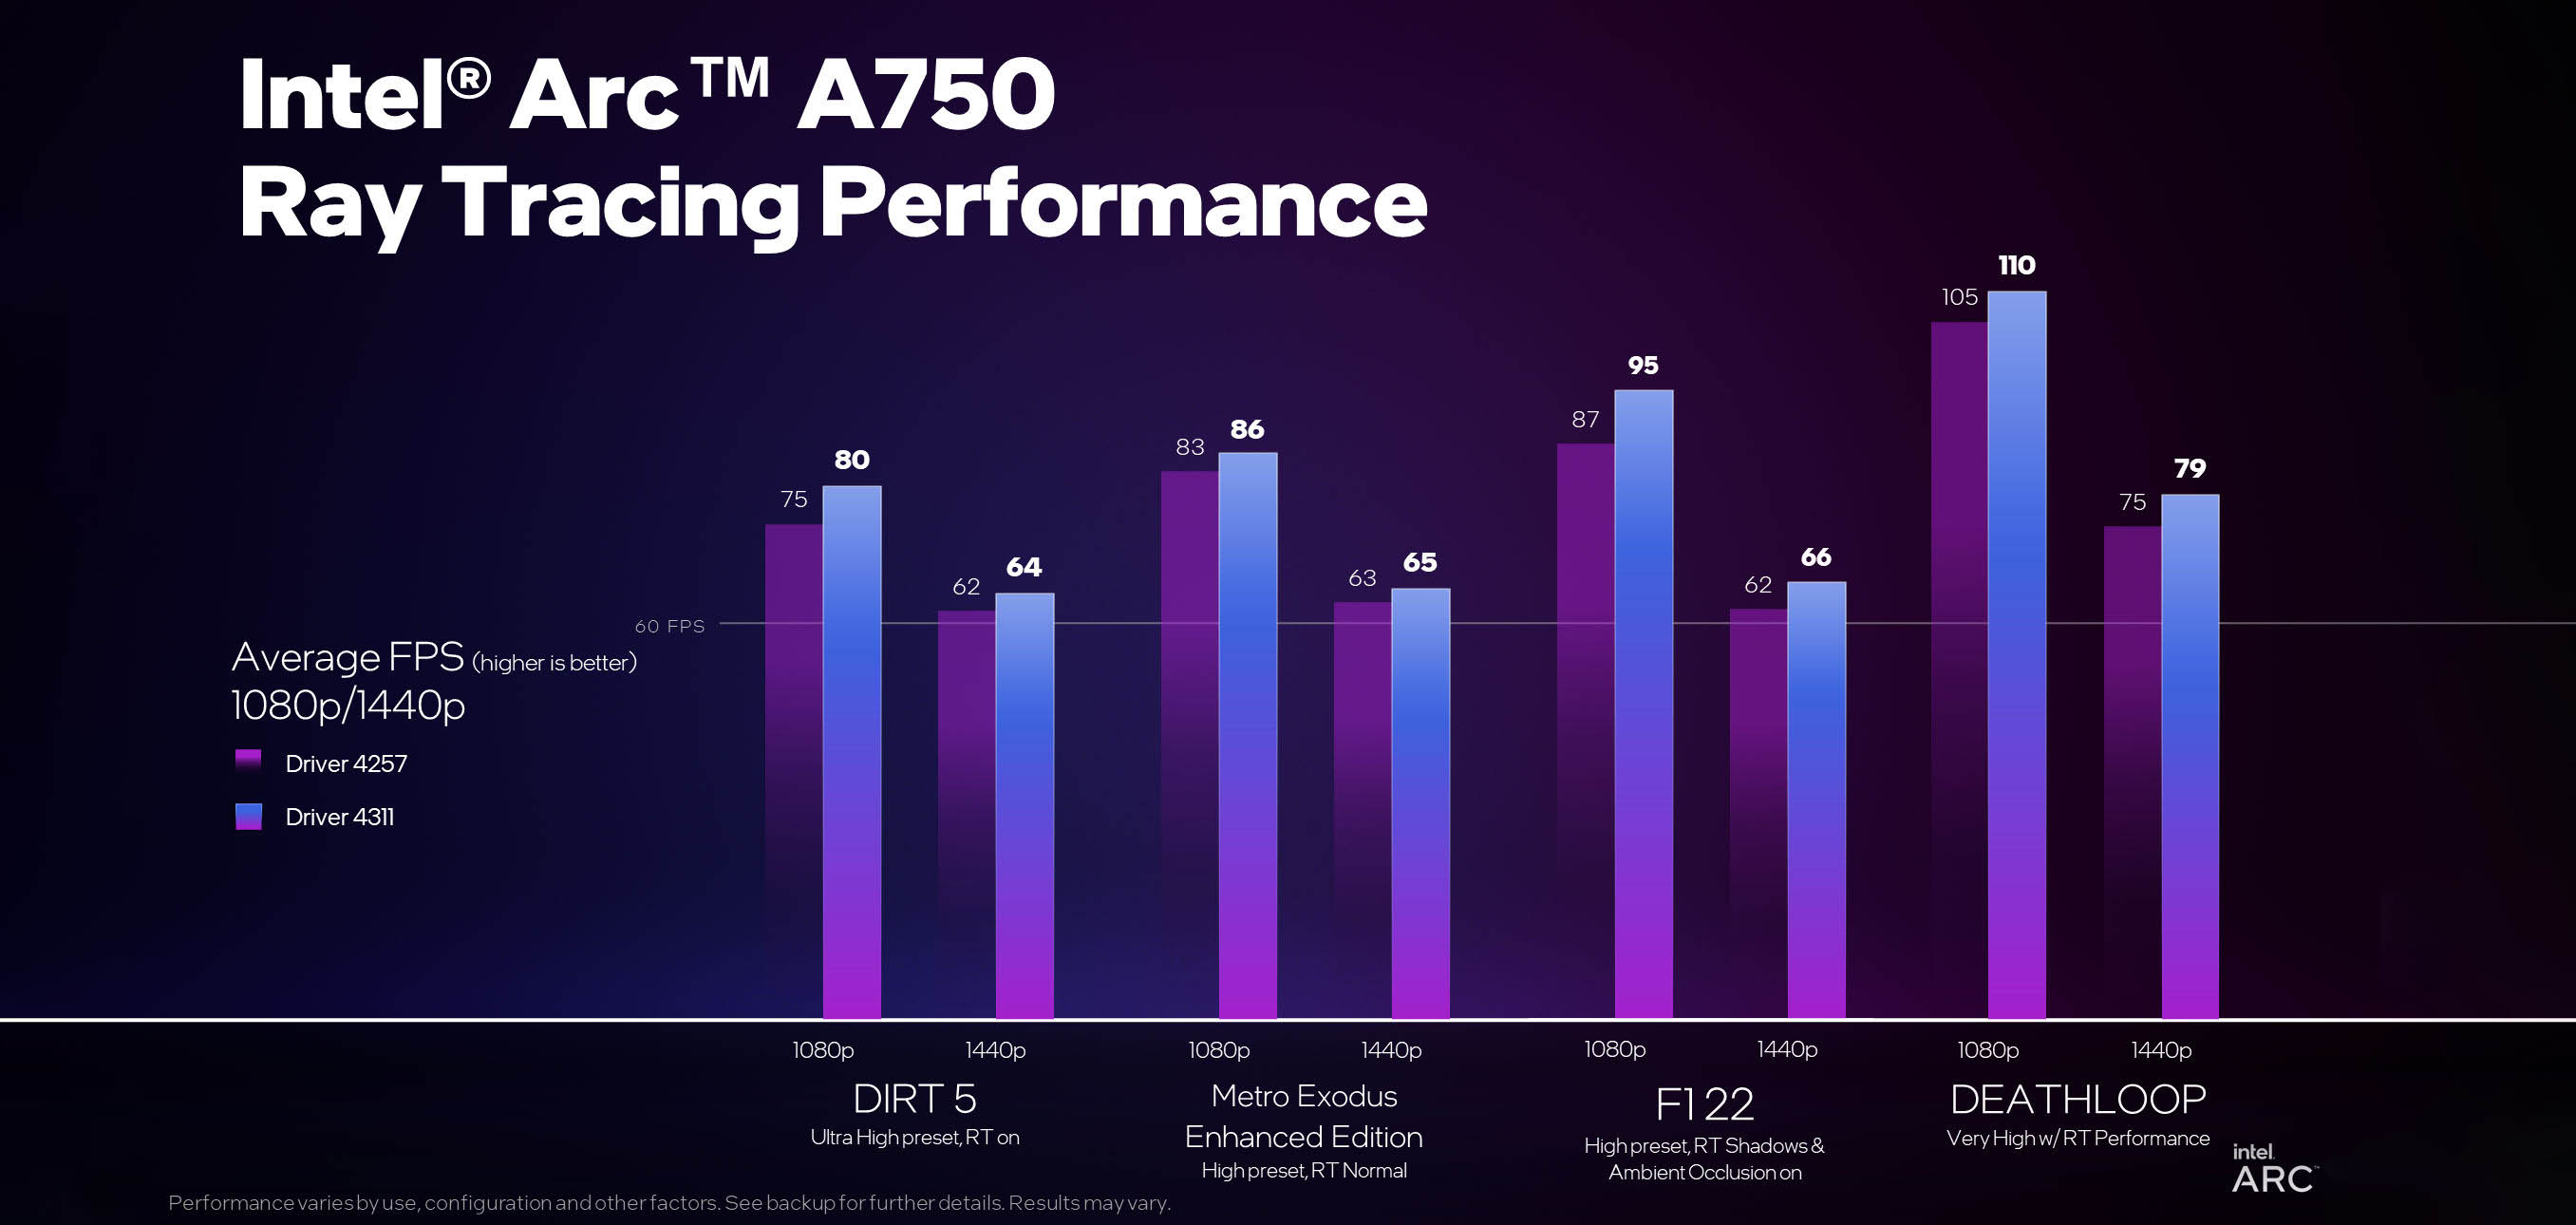 I hope no one gets fired for this - Intel Arc A770 First Look